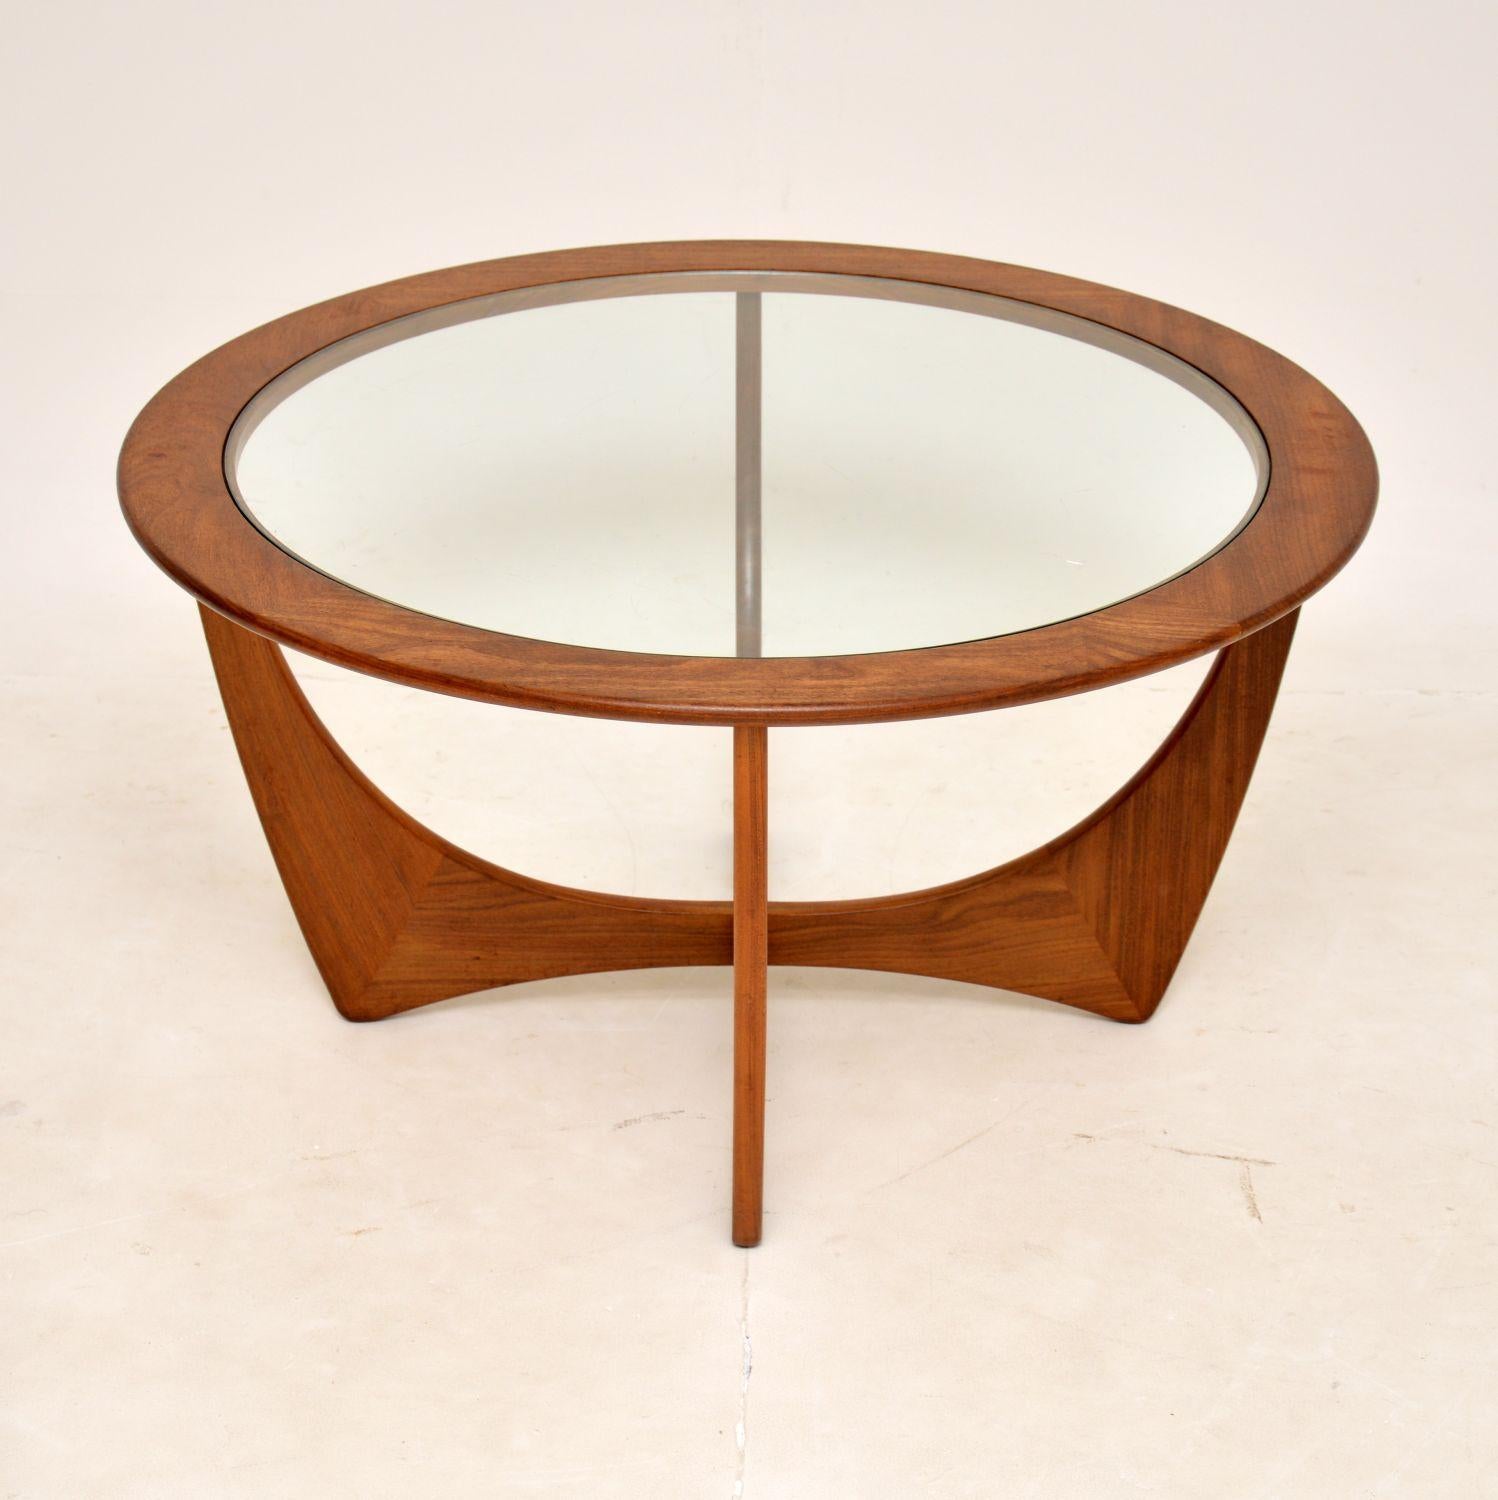 A stylish and iconic design, this solid teak coffee table was designed by V.W Wilkins for G- Plan. It was made in England, and dates from the 1960’s.

It is of superb quality and is a very useful size. The solid teak frame has a lovely colour and